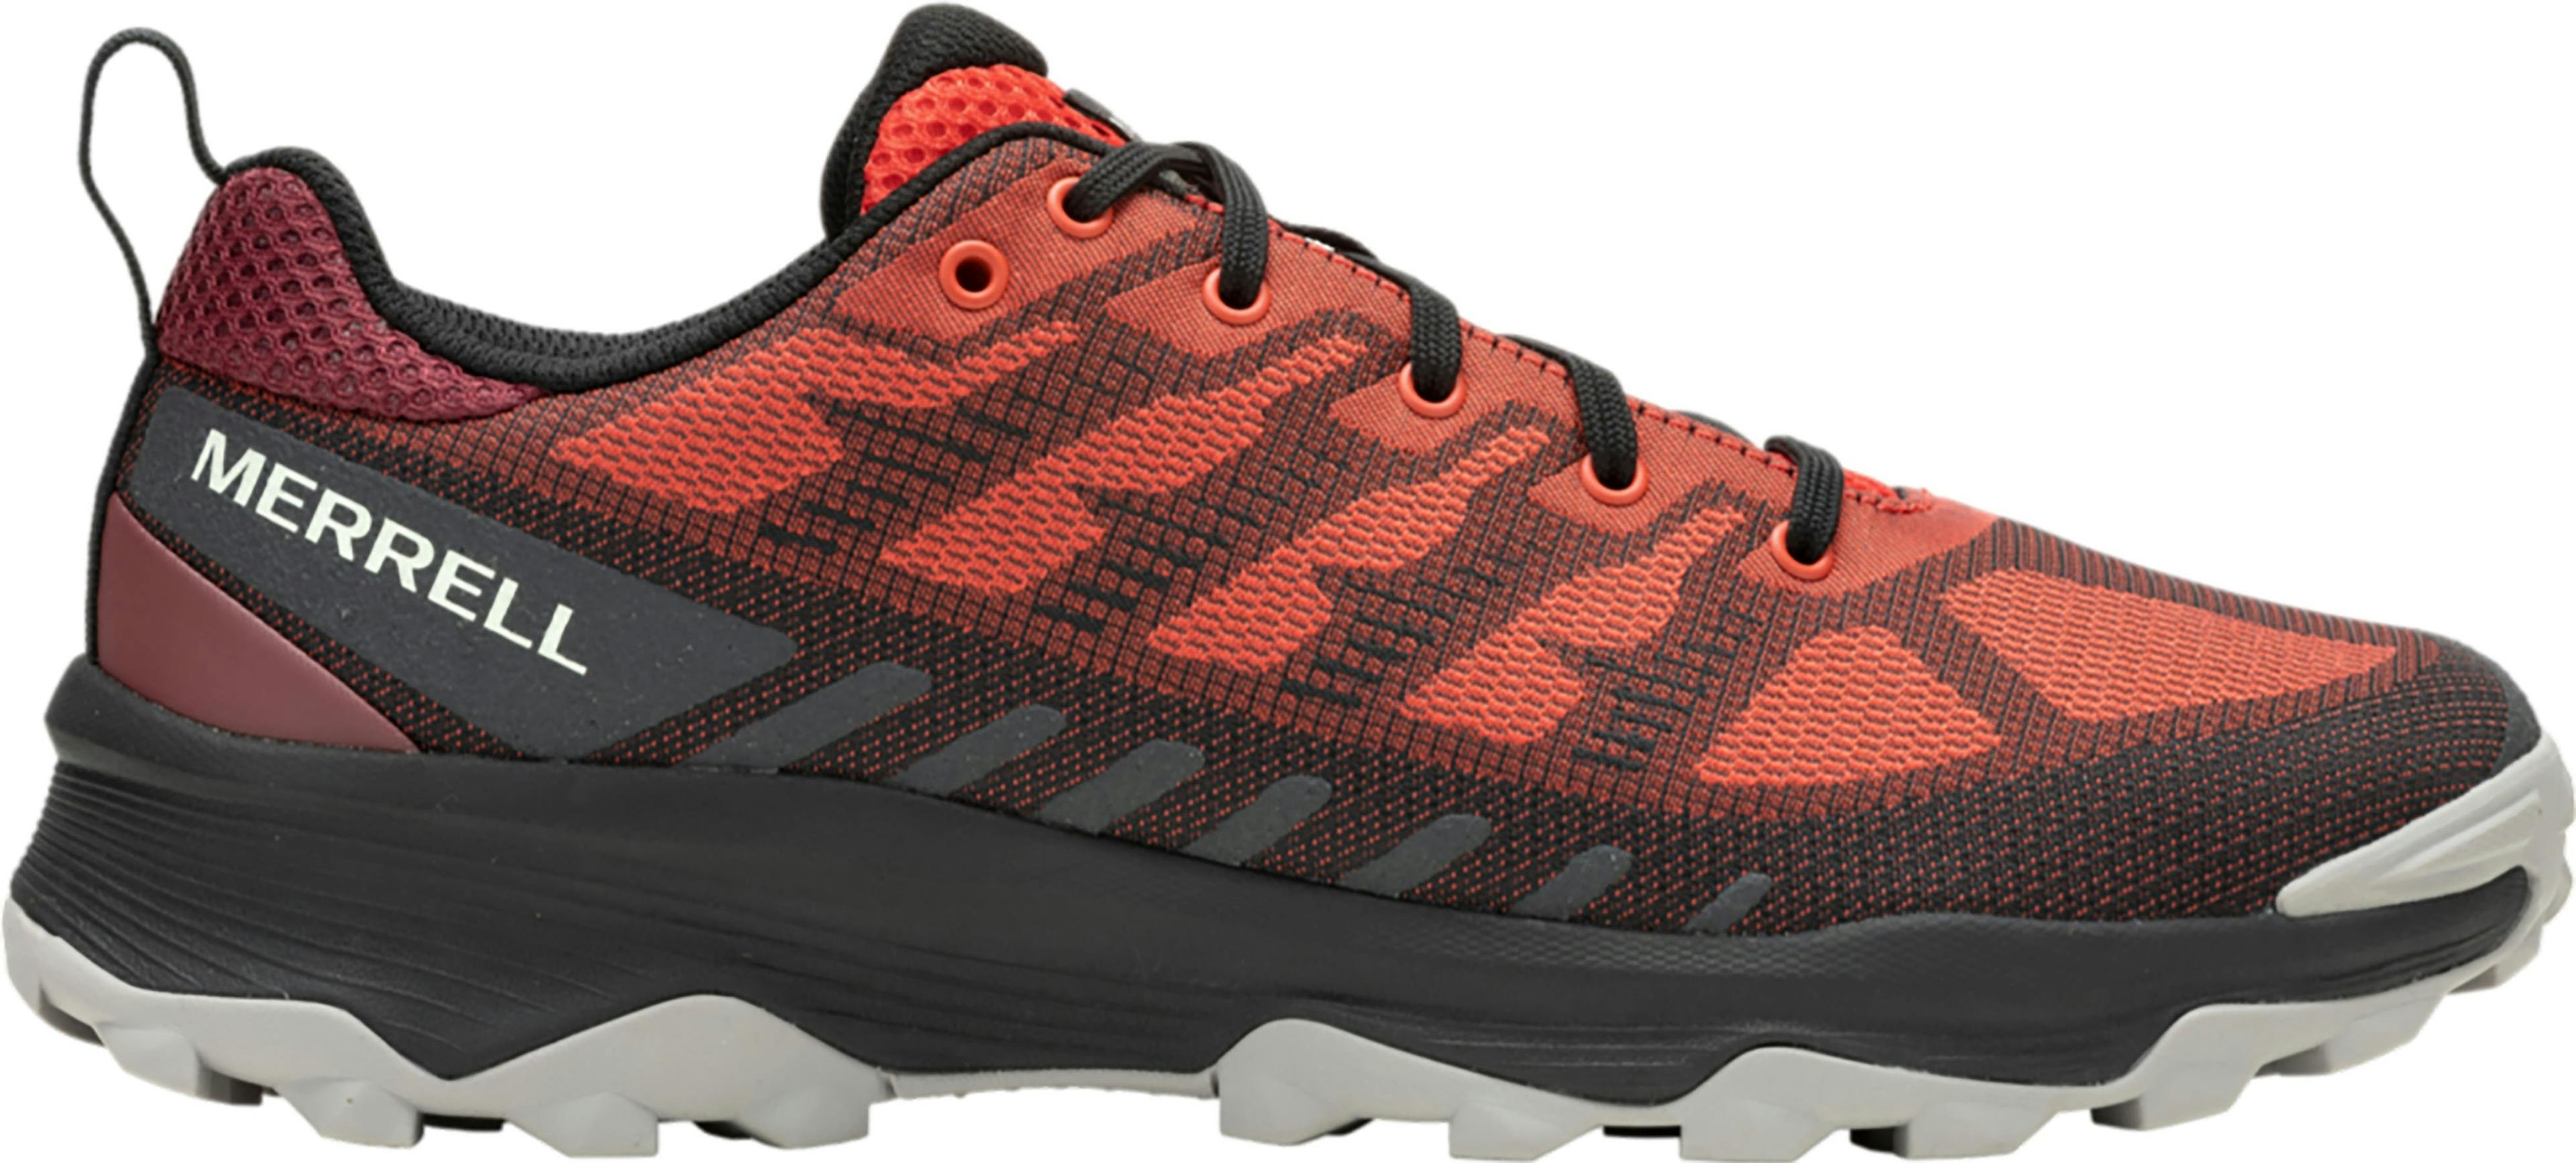 Product image for Speed Eco Hiking Shoes - Men's